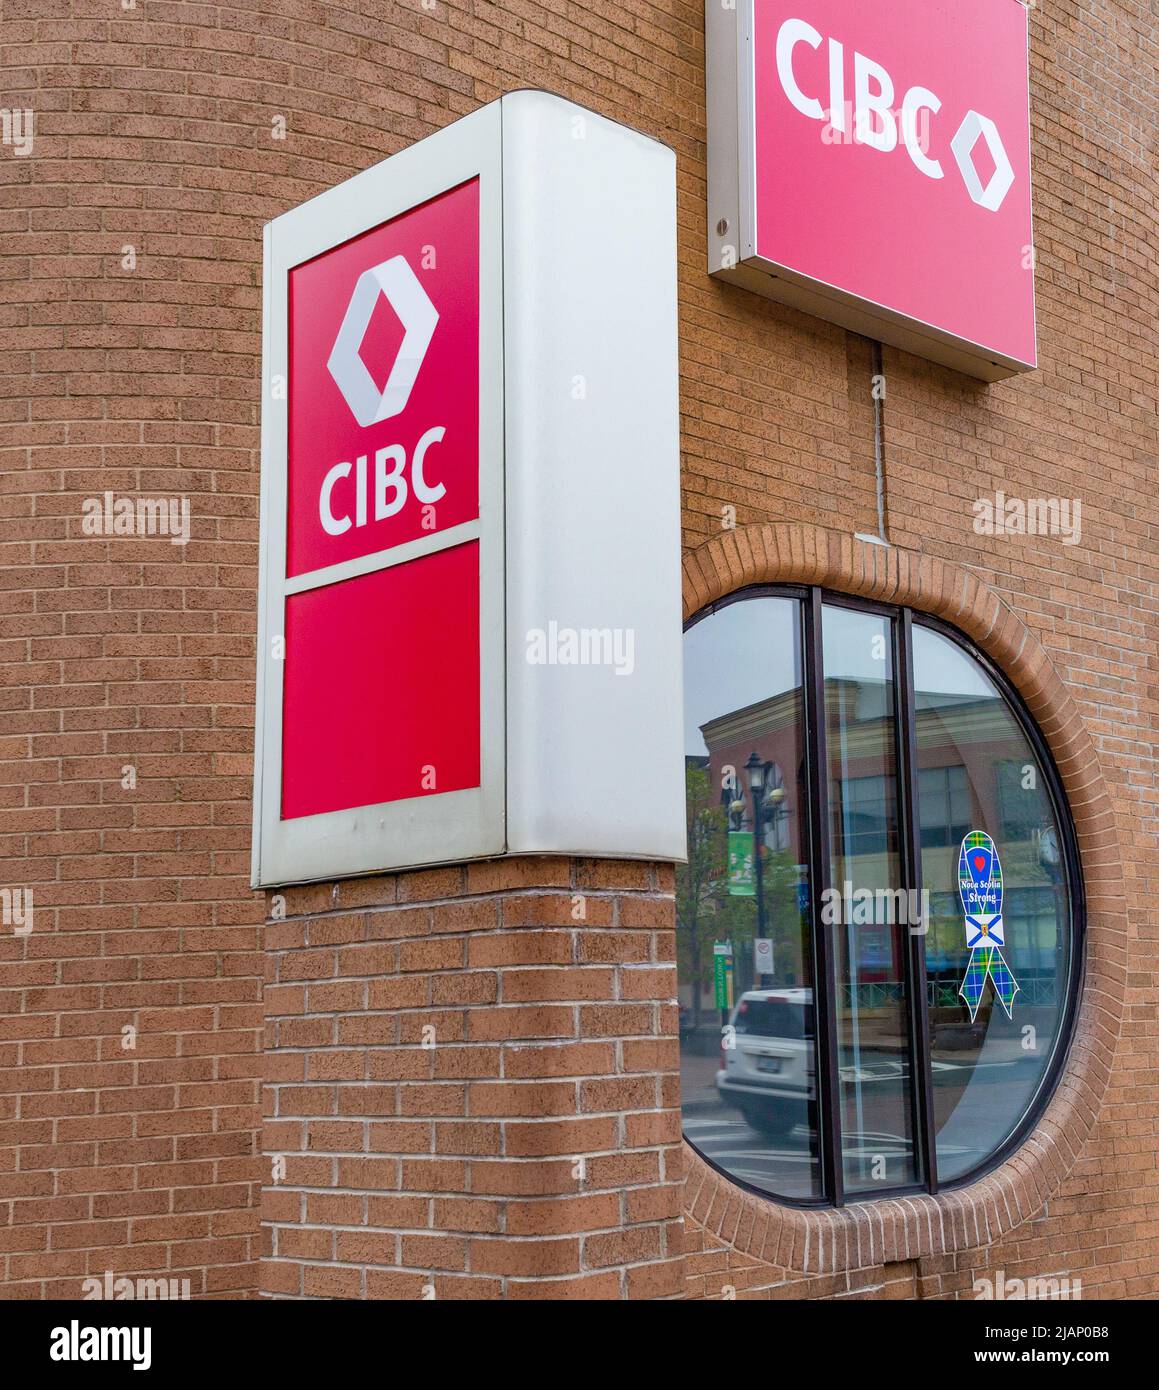 Truro, Canada - May 16, 2022: CIBC banking centre branch. The Canadian Imperial Bank of Commerce or CIBC, is one of Canada's large chartered banks. Stock Photo